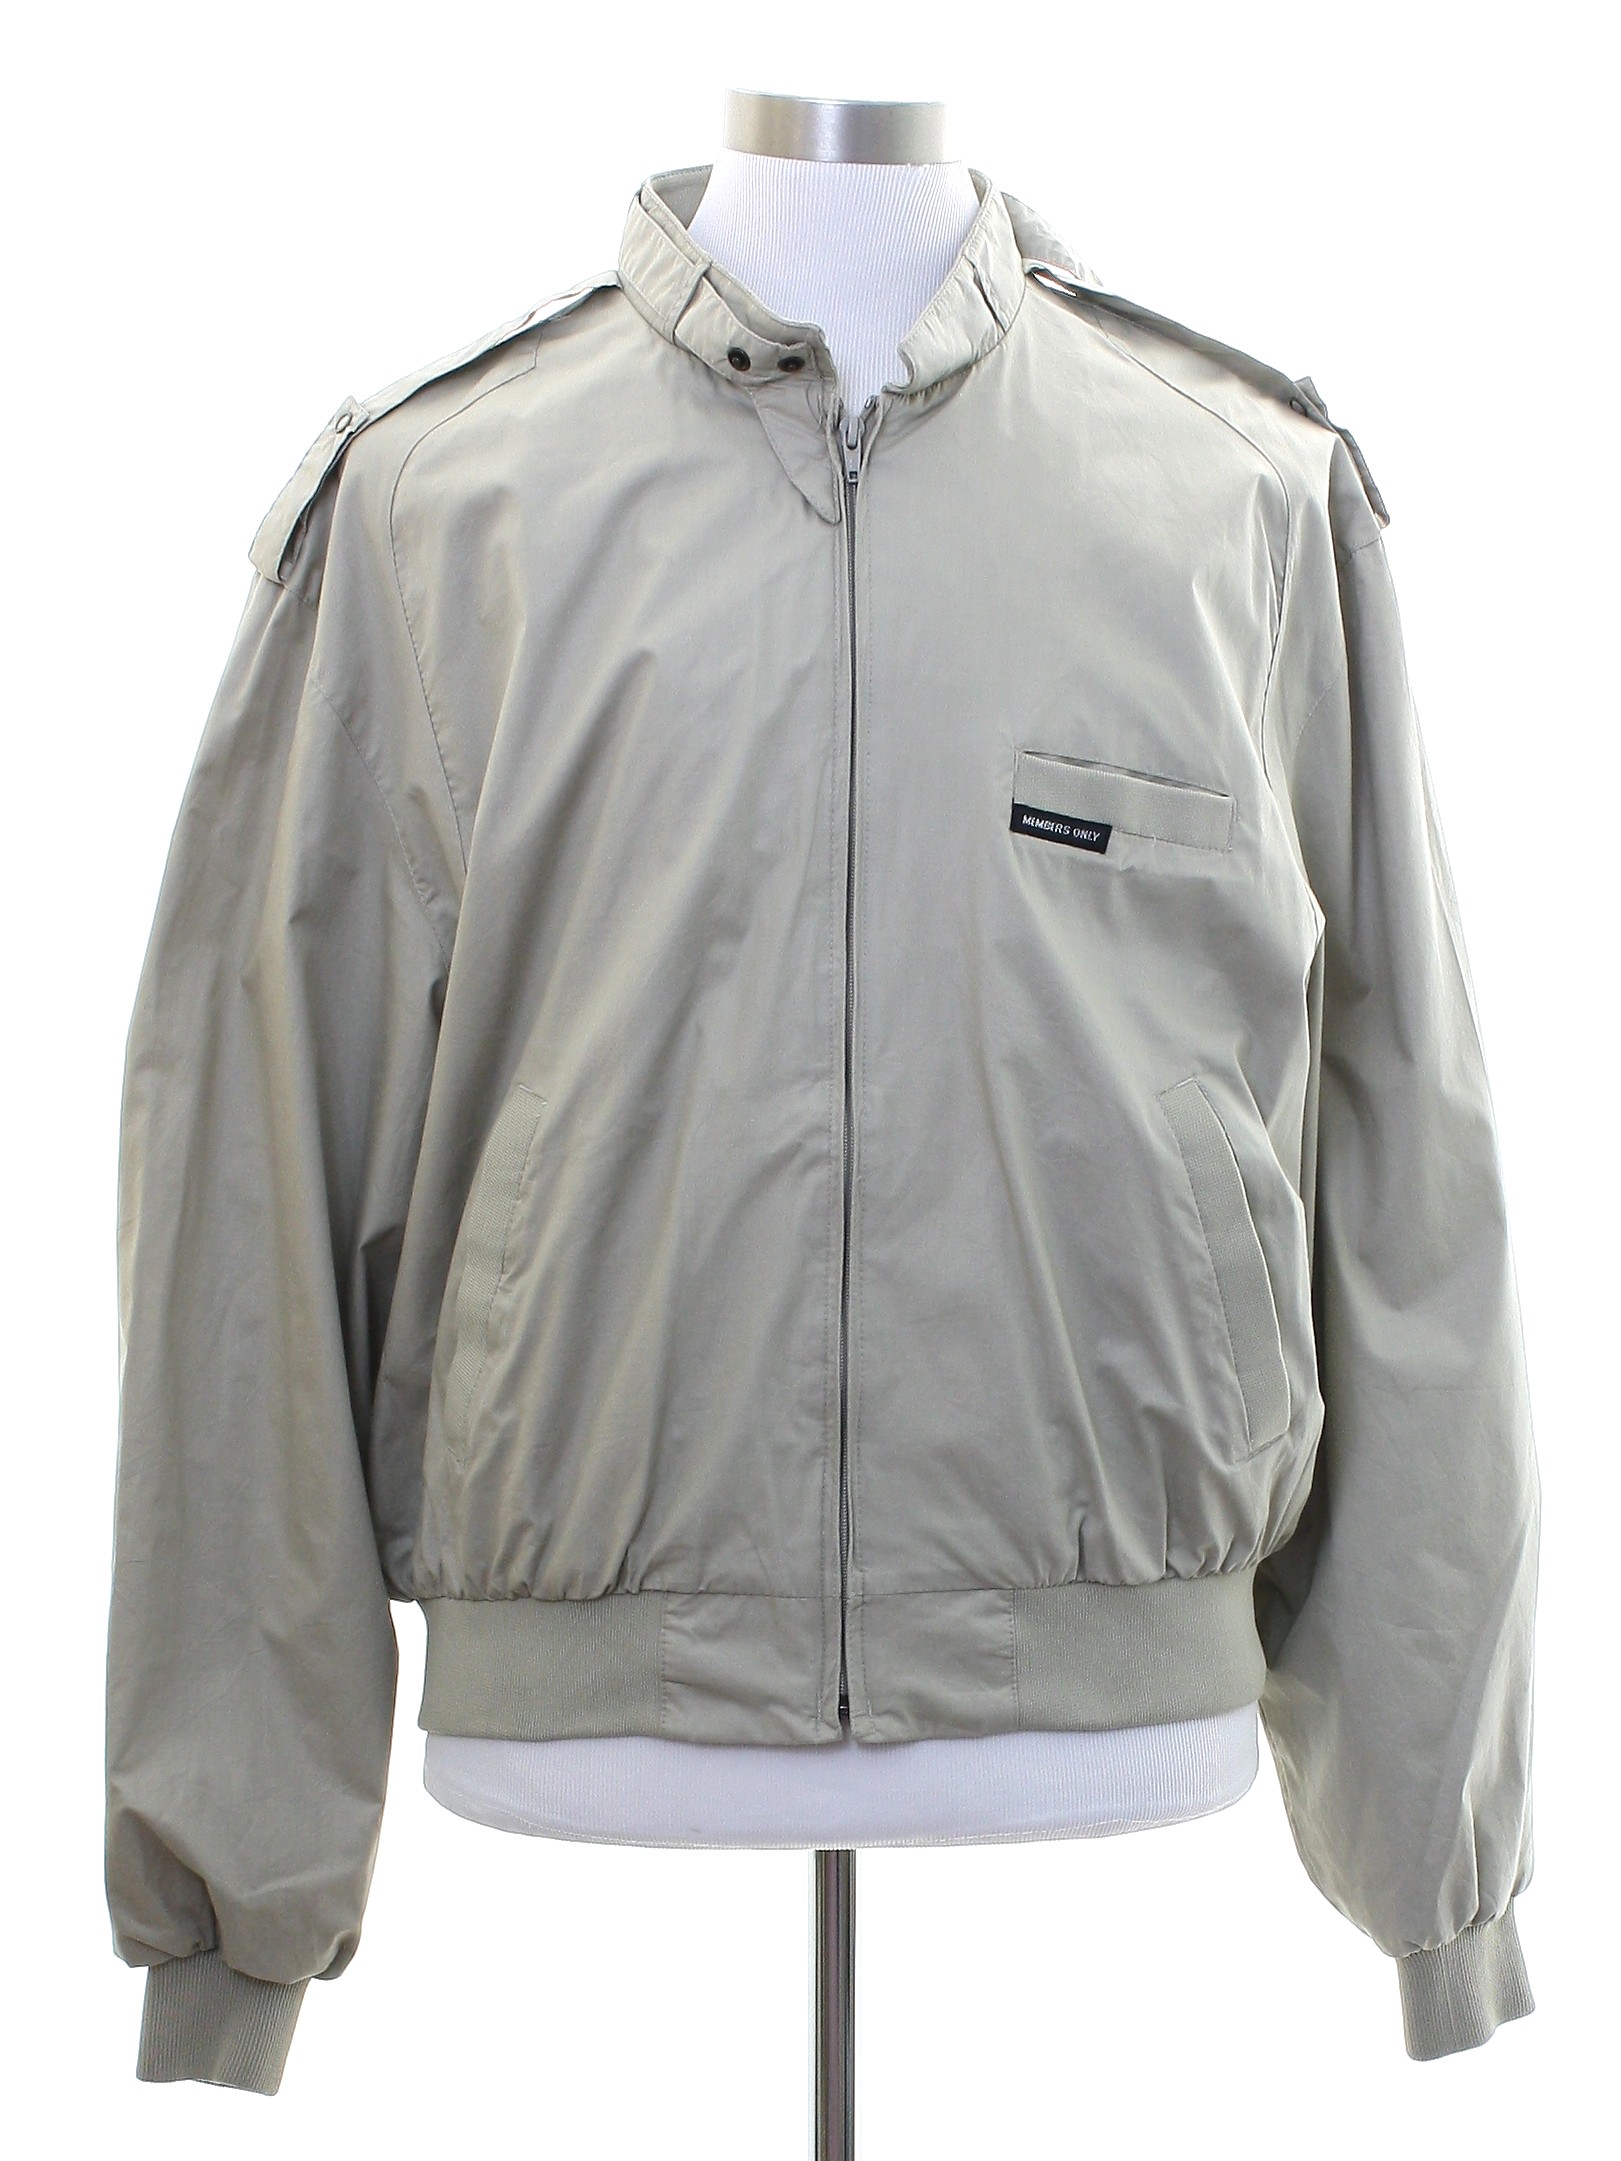 Retro 1980s Jacket: 80s style (made recently) -Members Only- Mens beige ...